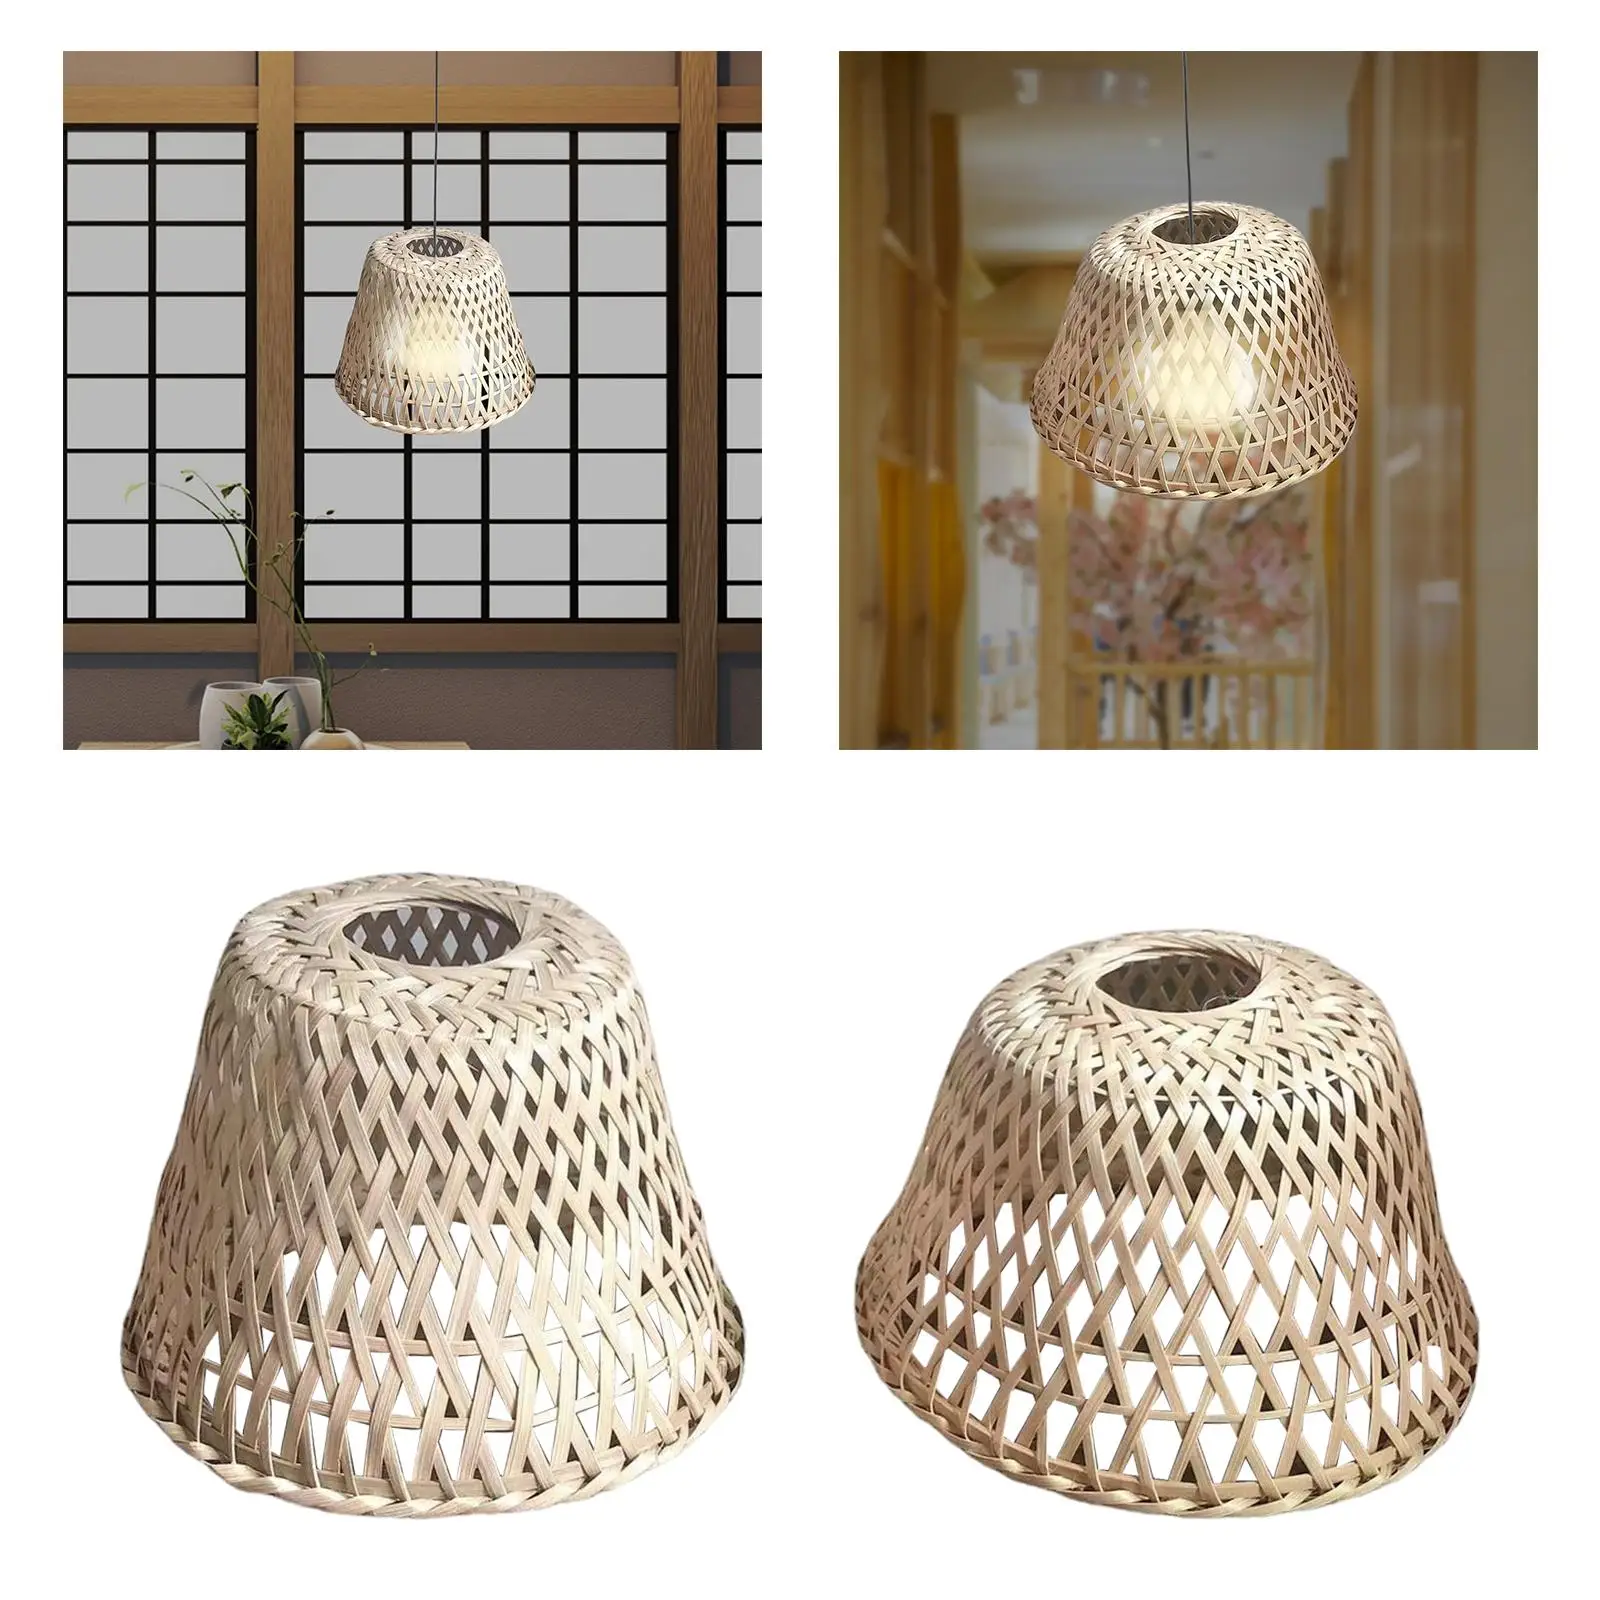 Retro Style Bamboo Weave Hanging Lamp Shade Premium Material for Dining Room